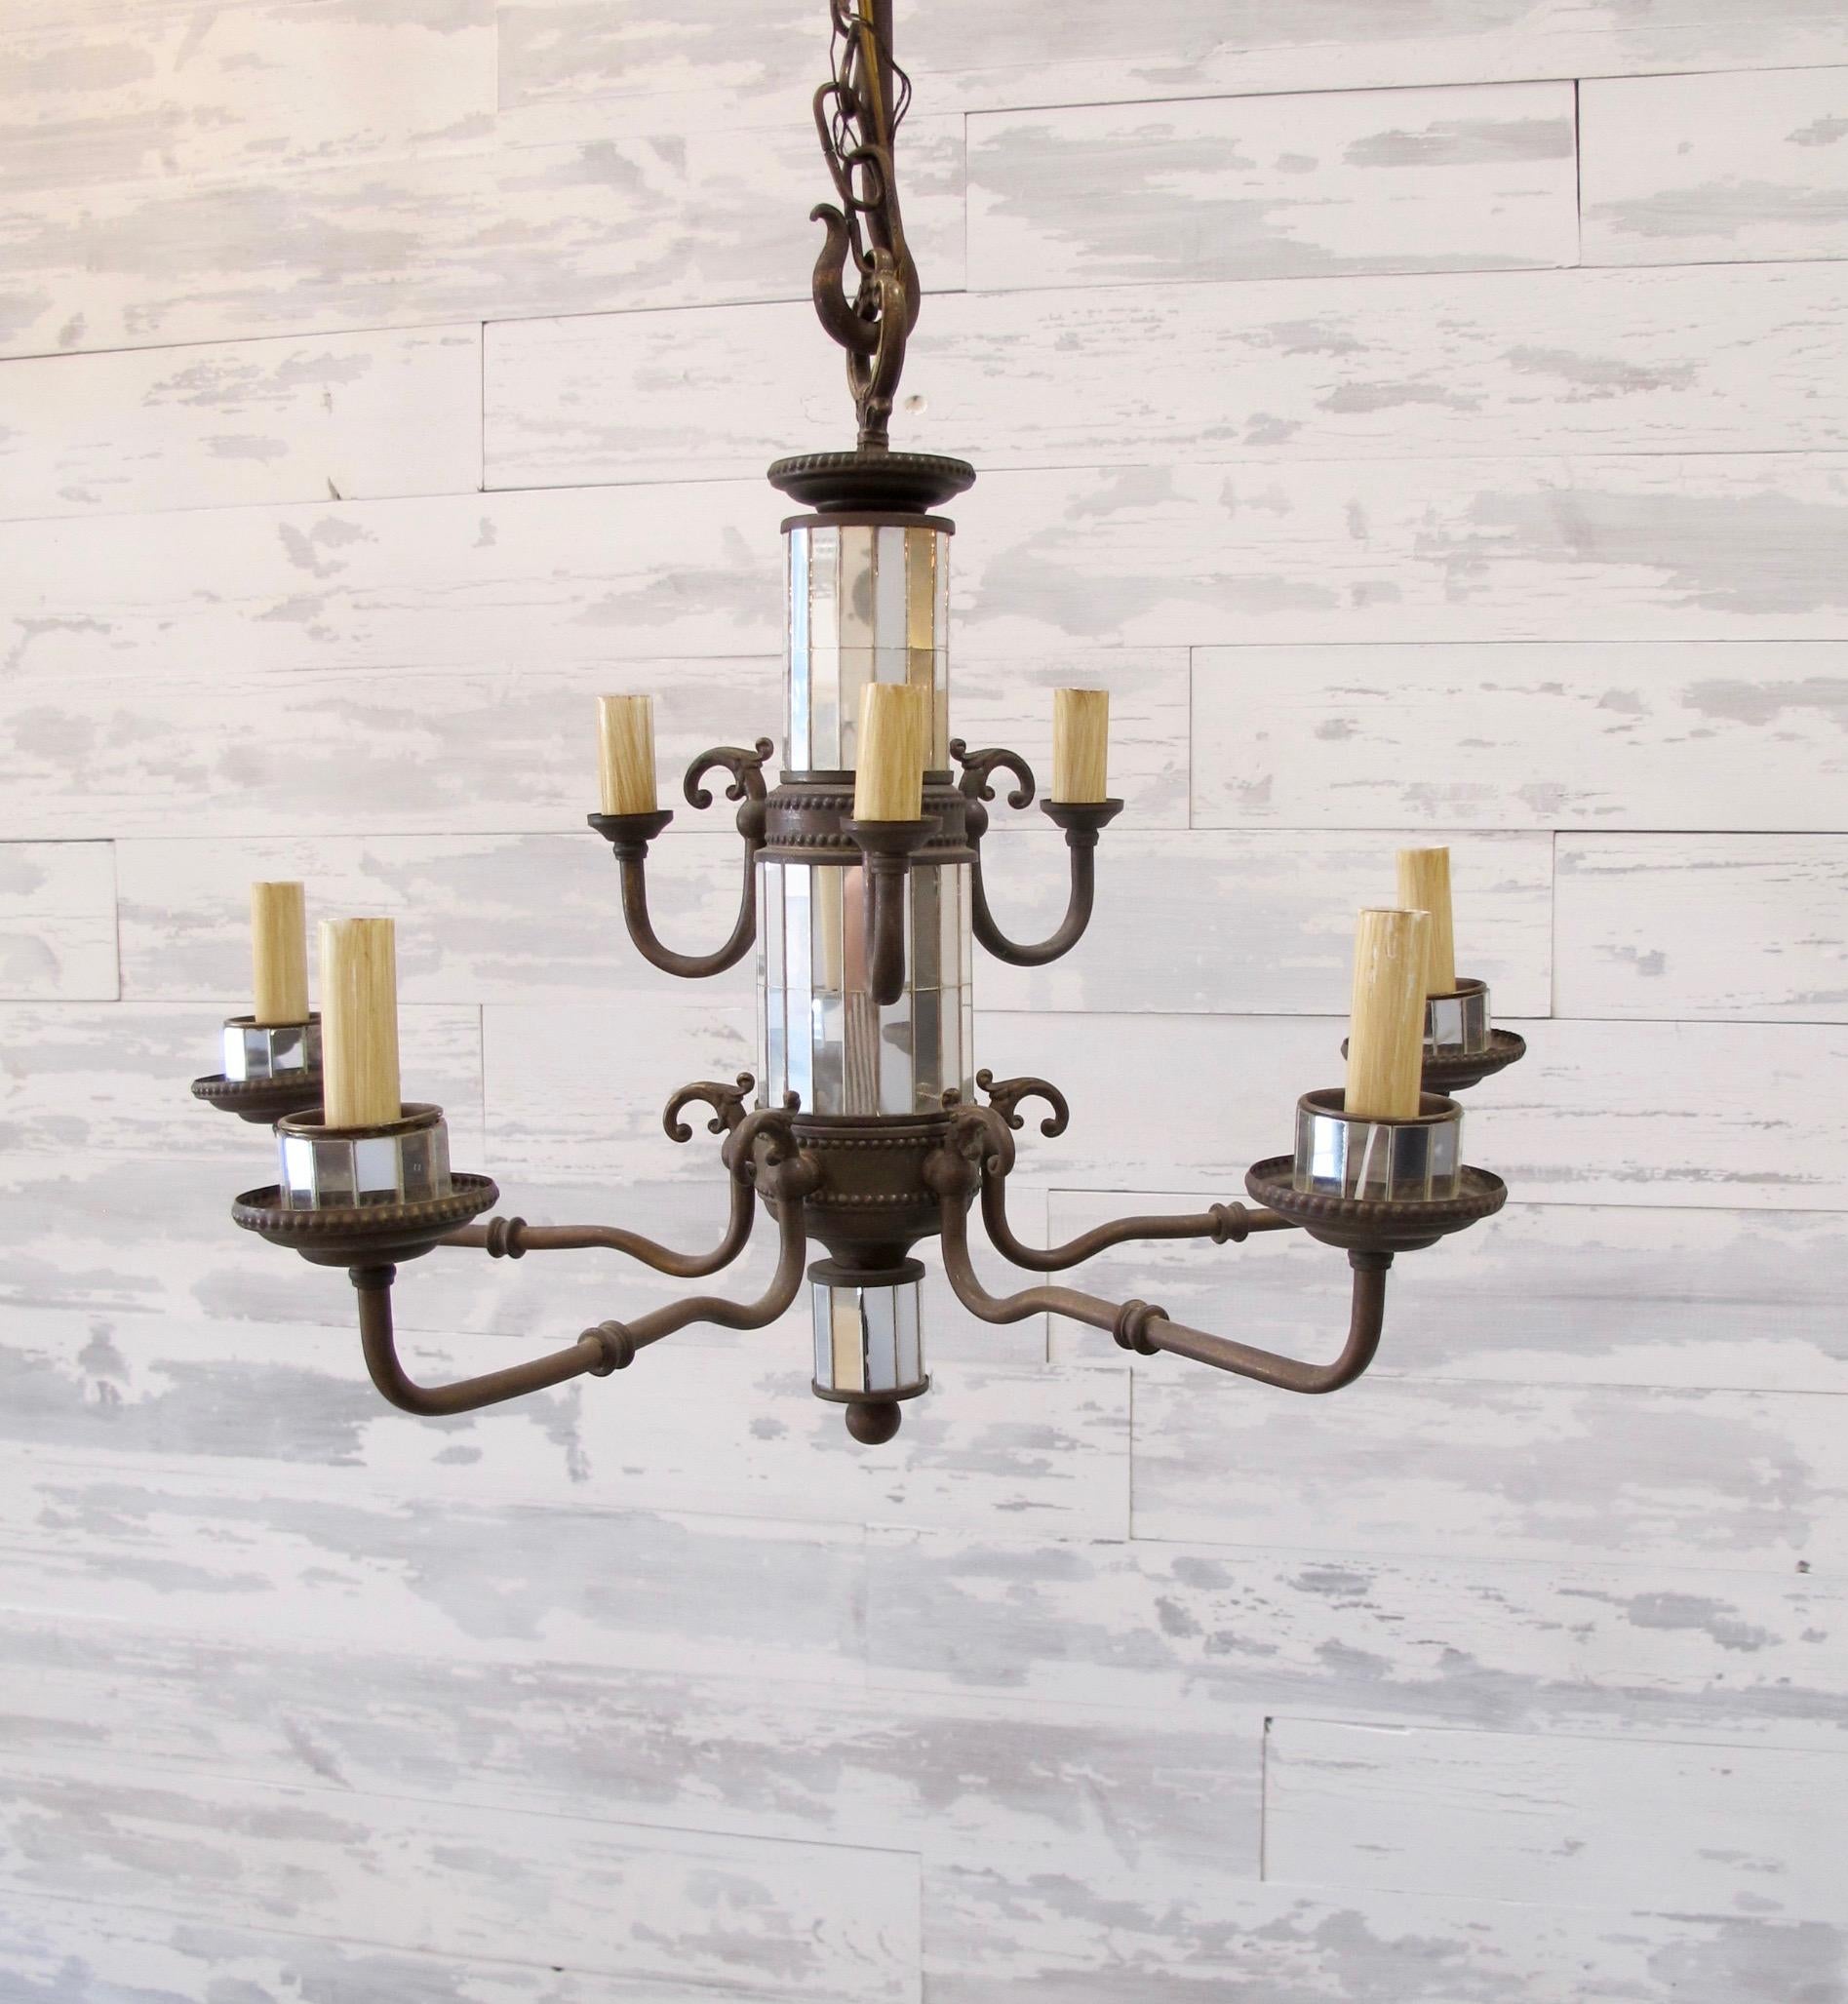 American Mirrored Chandelier For Sale